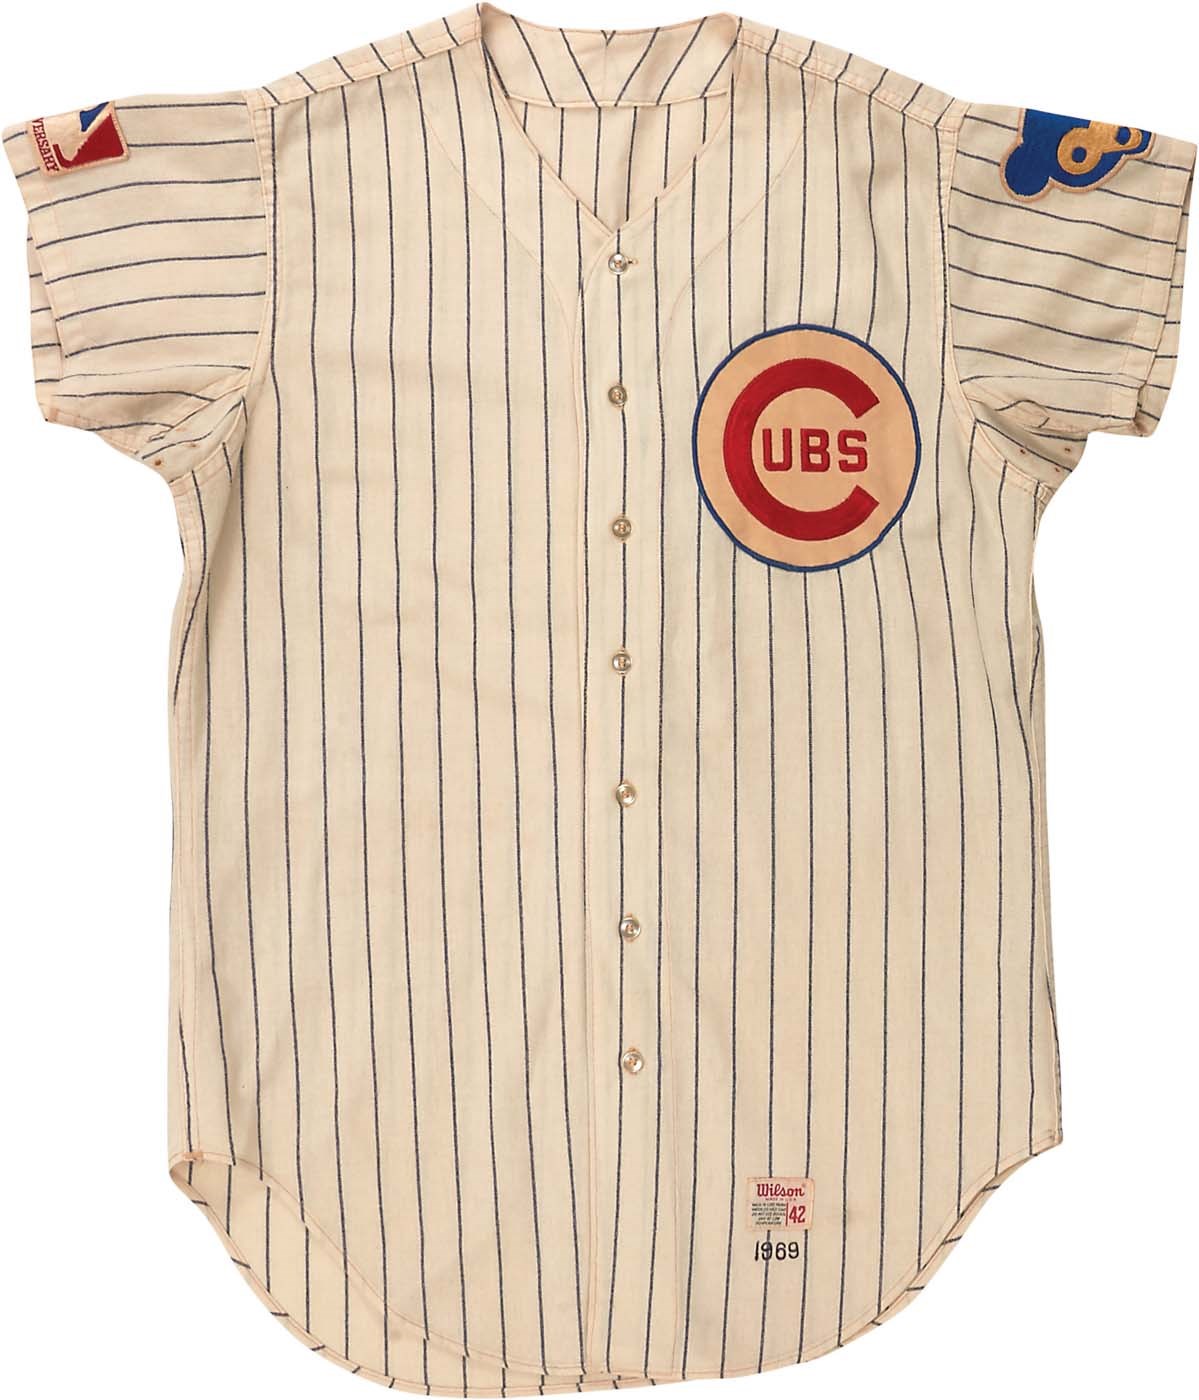 Chicago Cubs & Wrigley Field - 1969 Pete Reiser Game Worn Cubs Jersey & Fergie Jenkins Game Worn Pants "Uniform" Given to Cubs Scout (Photo-Matched)